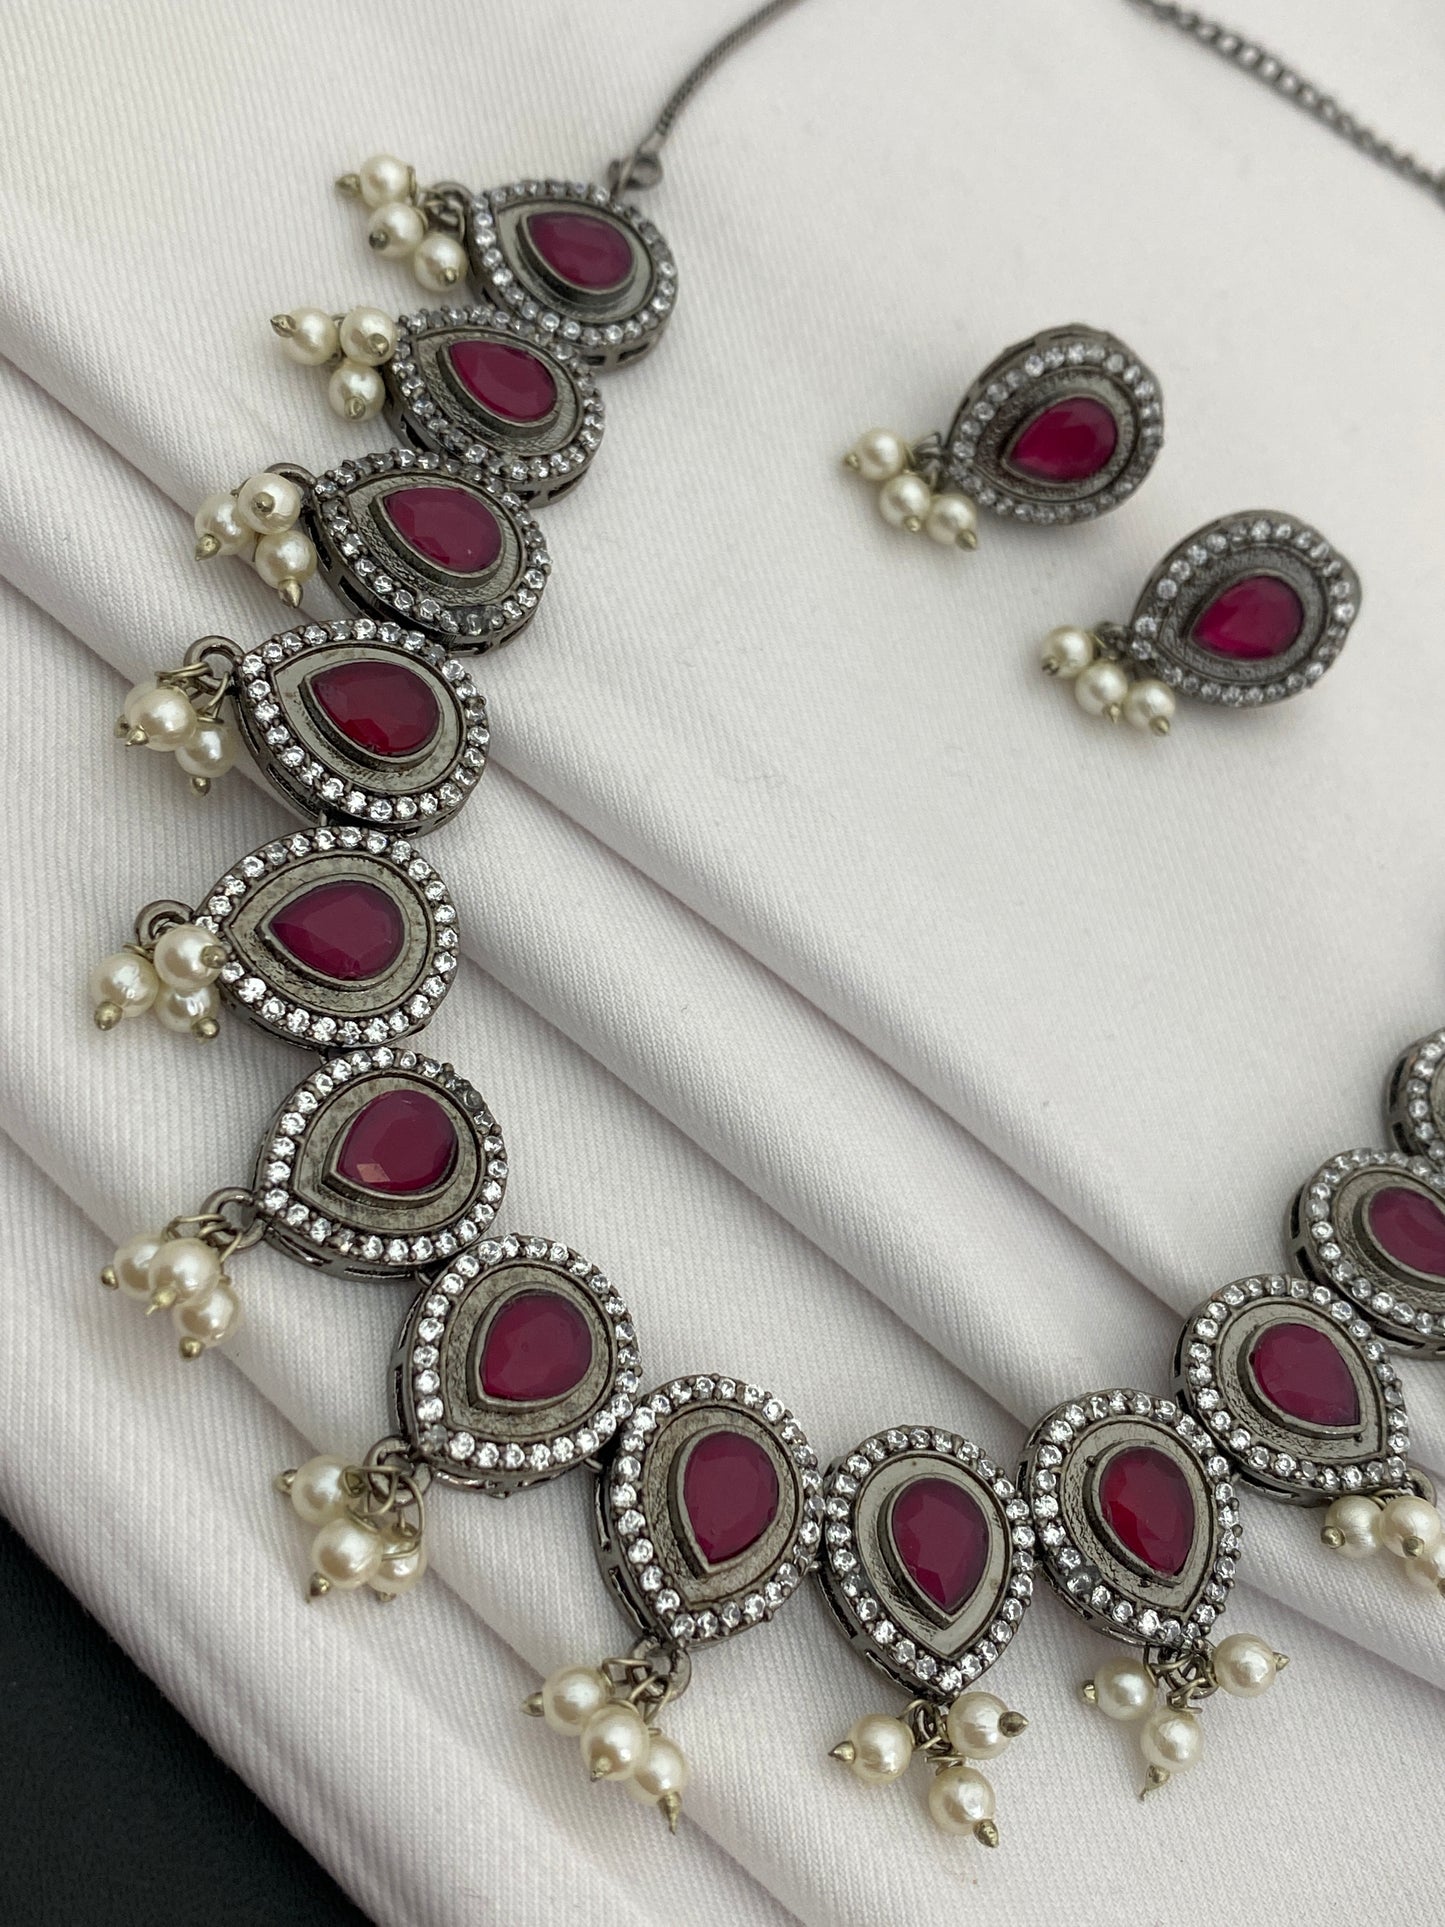 Ruby Stone Necklace Sets in USA